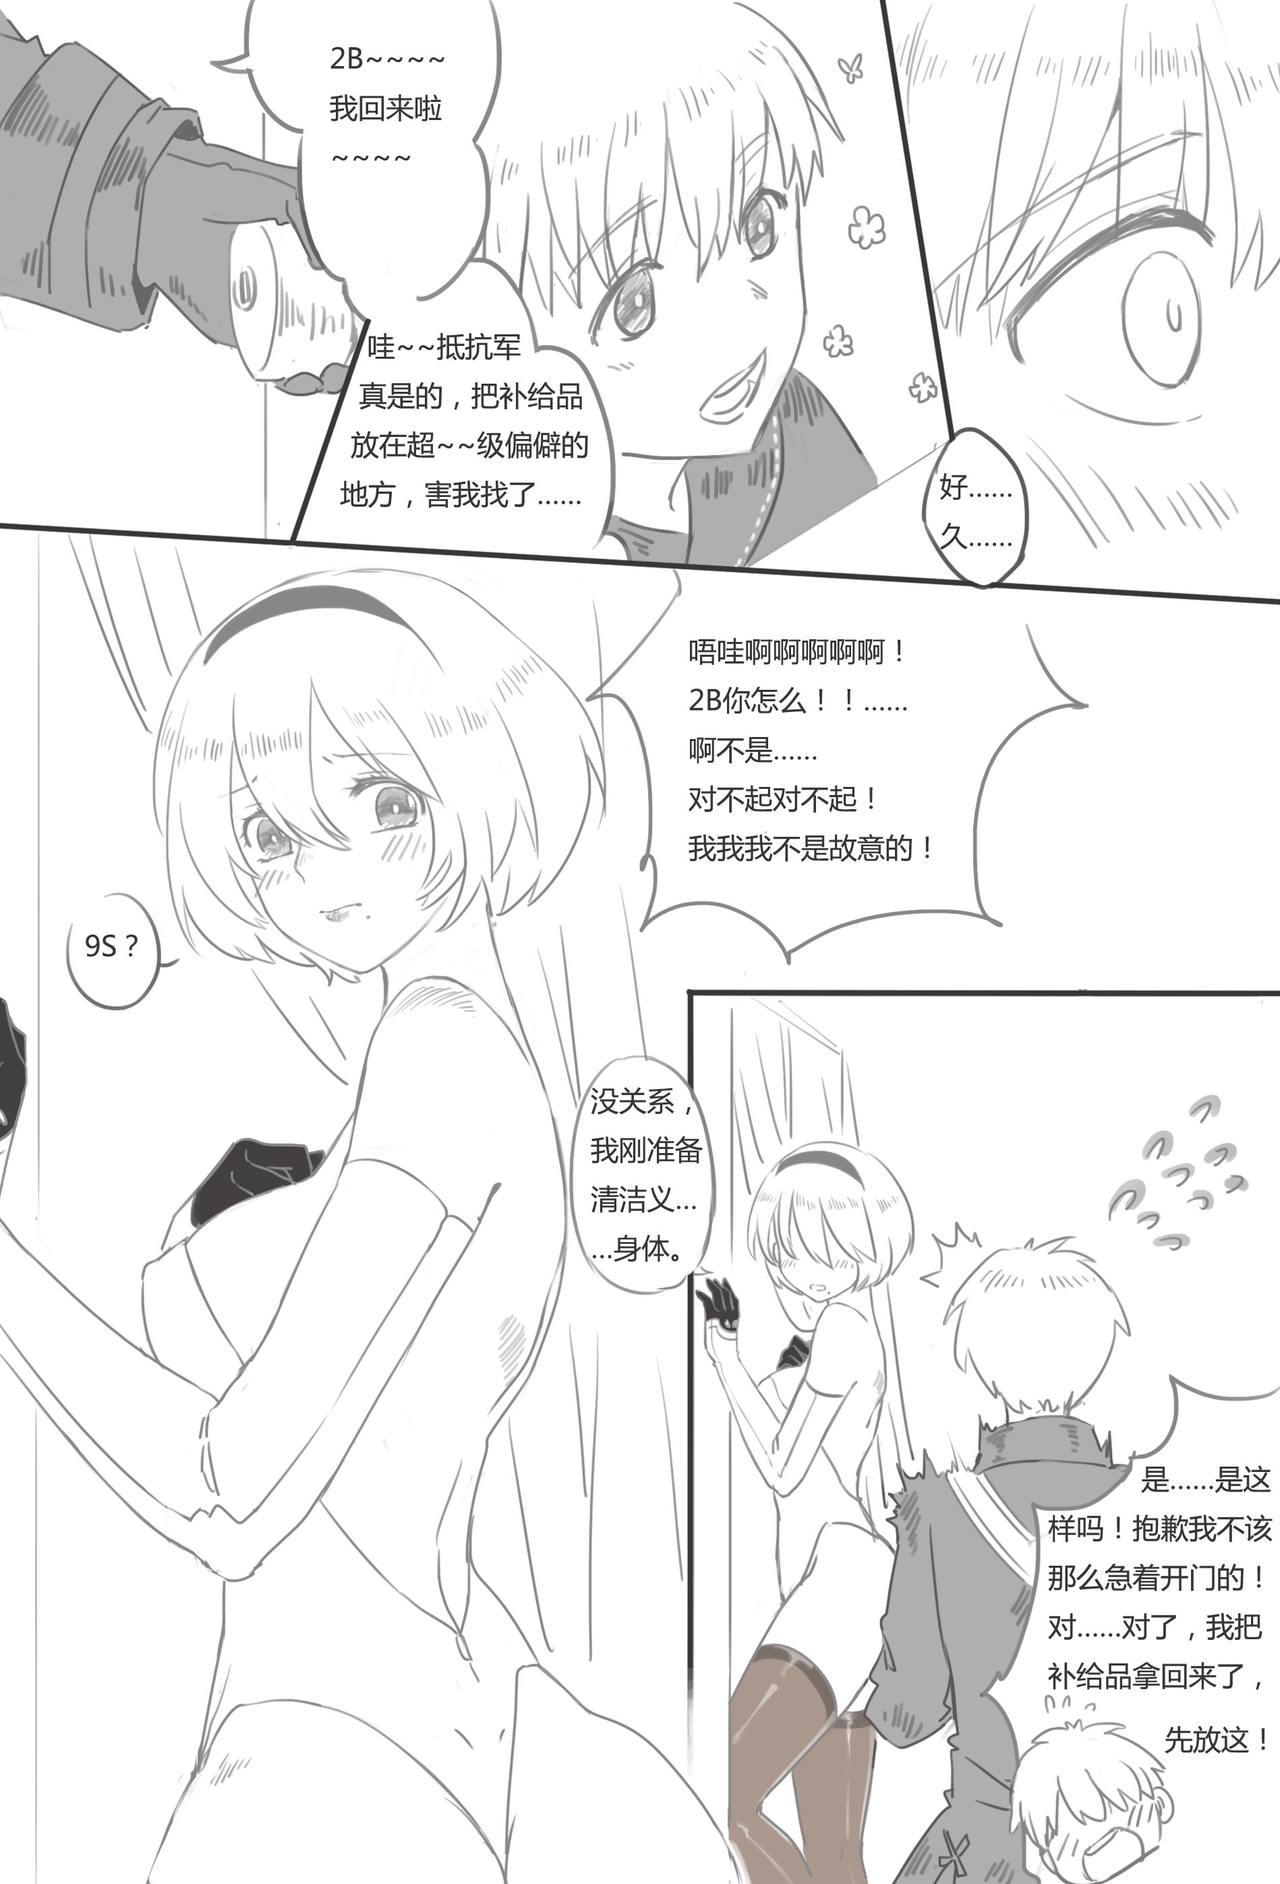 Threesome [WS] 9Sx2B - Life after the [E] end. (NieR:Automata) [Chinese] - Nier automata Free Amateur Porn - Page 3